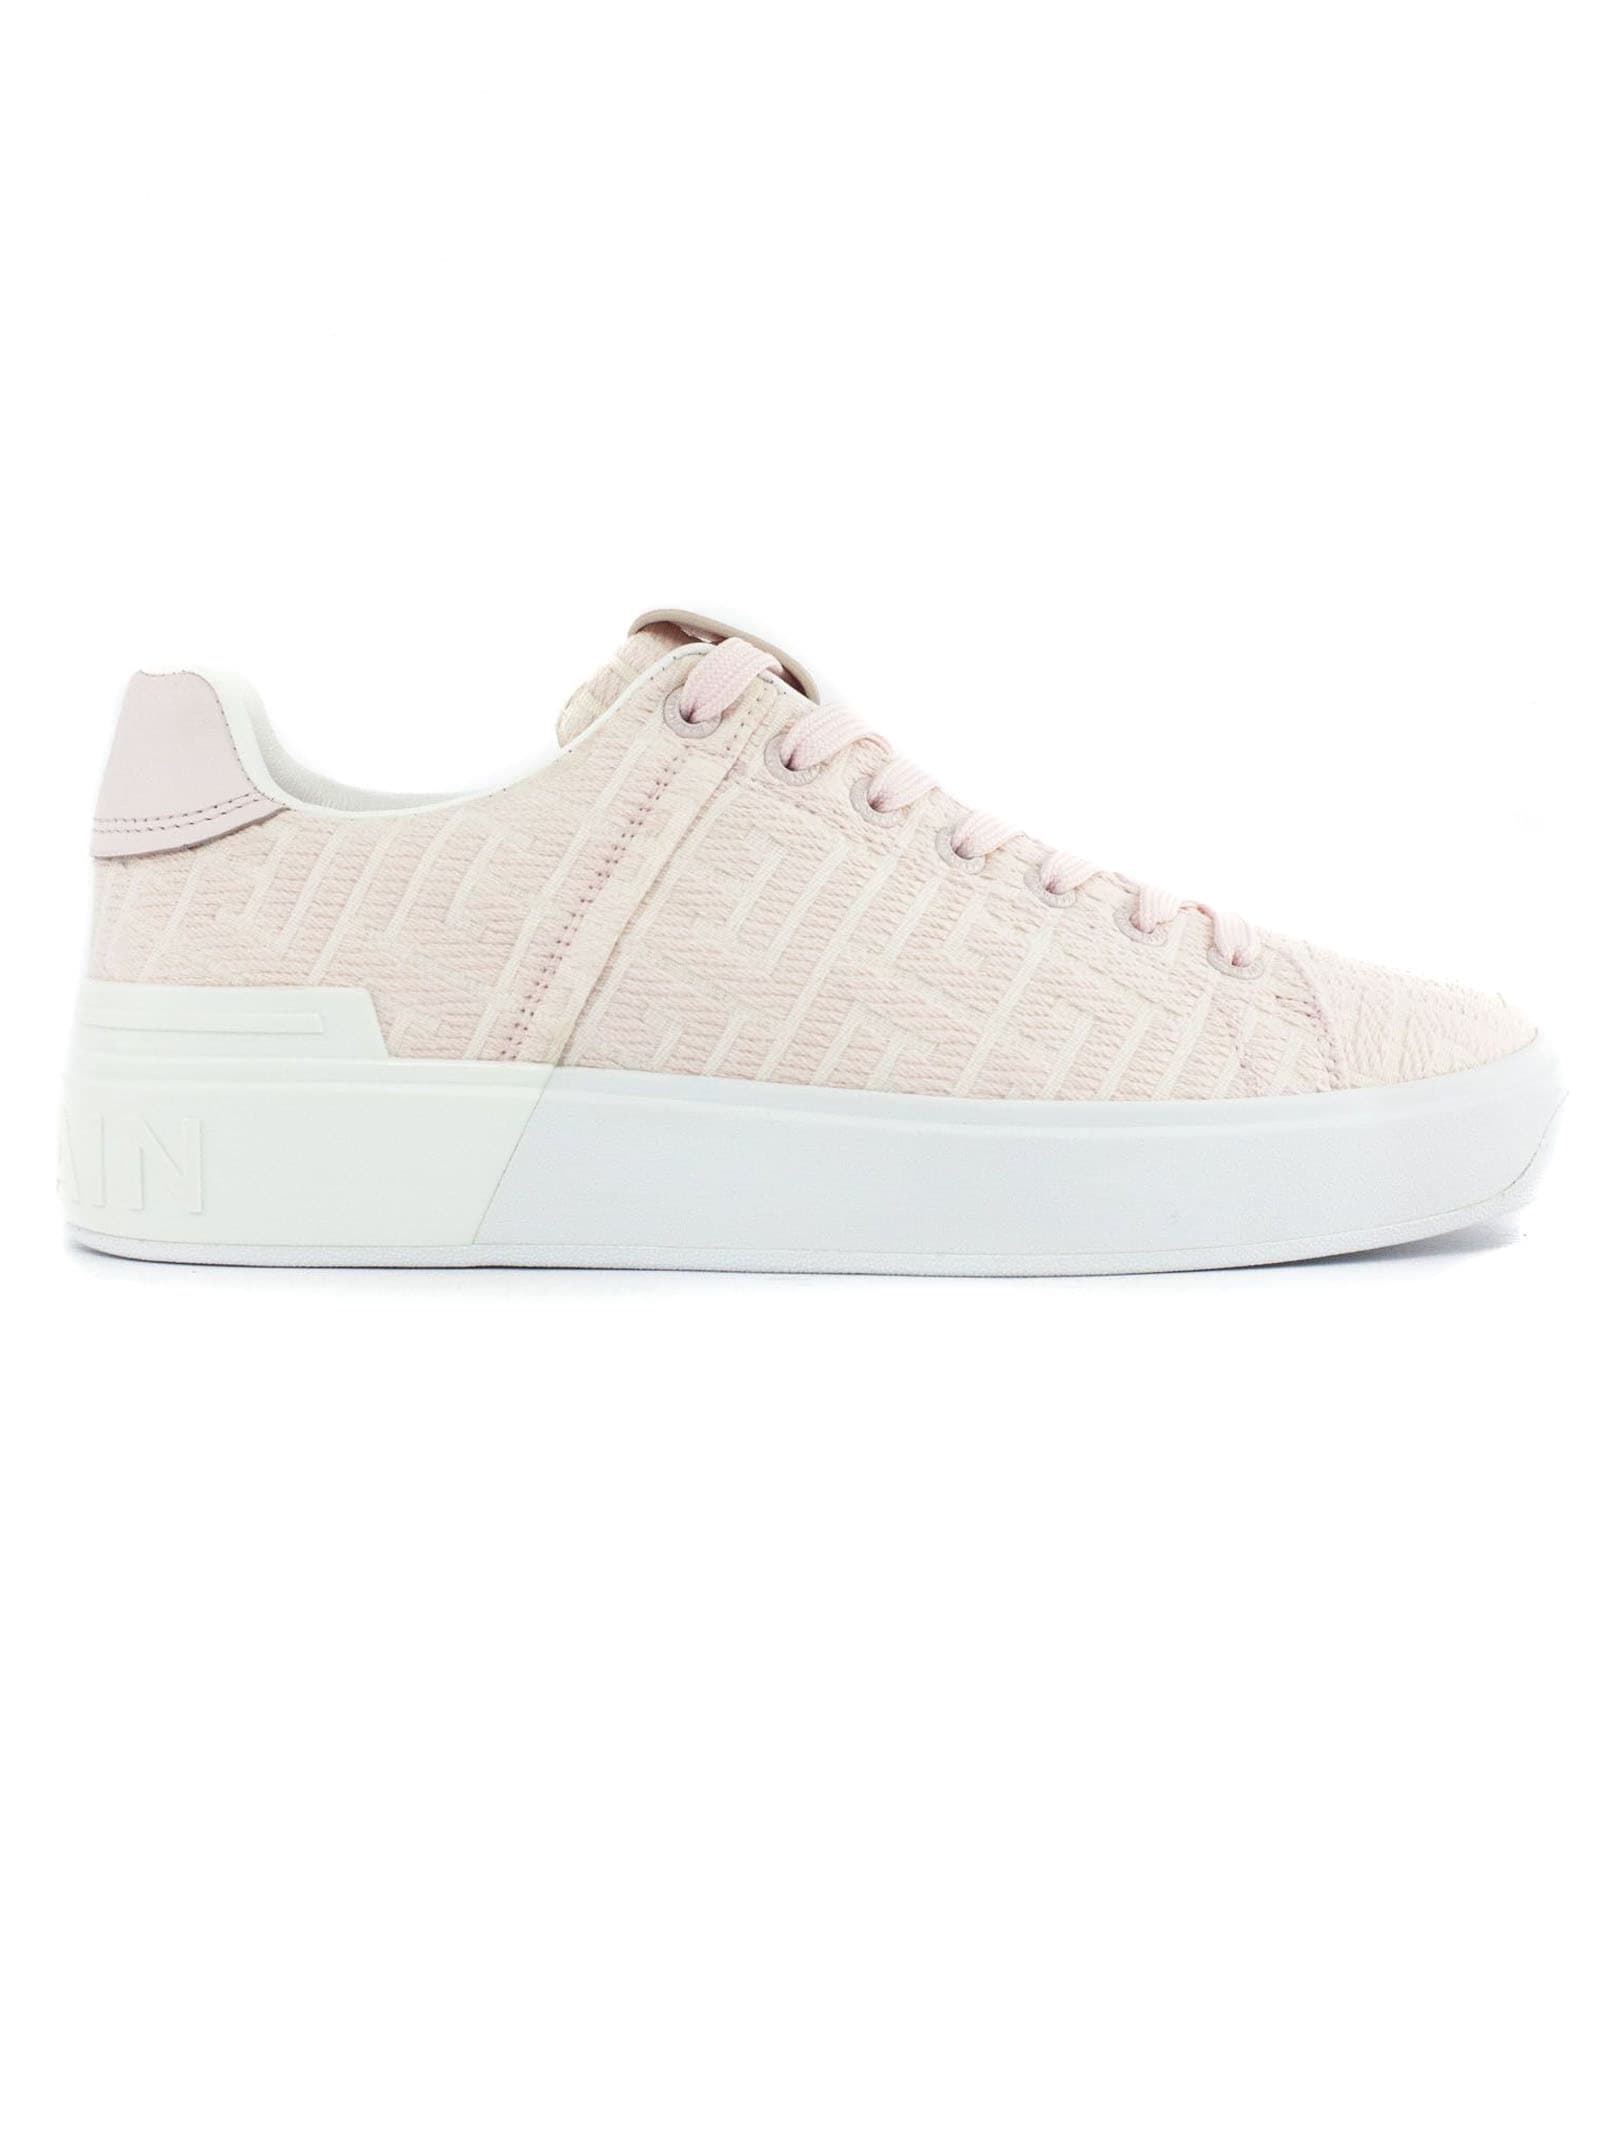 Buy Balmain Ivory And Pink Jacquard Sneakers online, shop Balmain shoes with free shipping